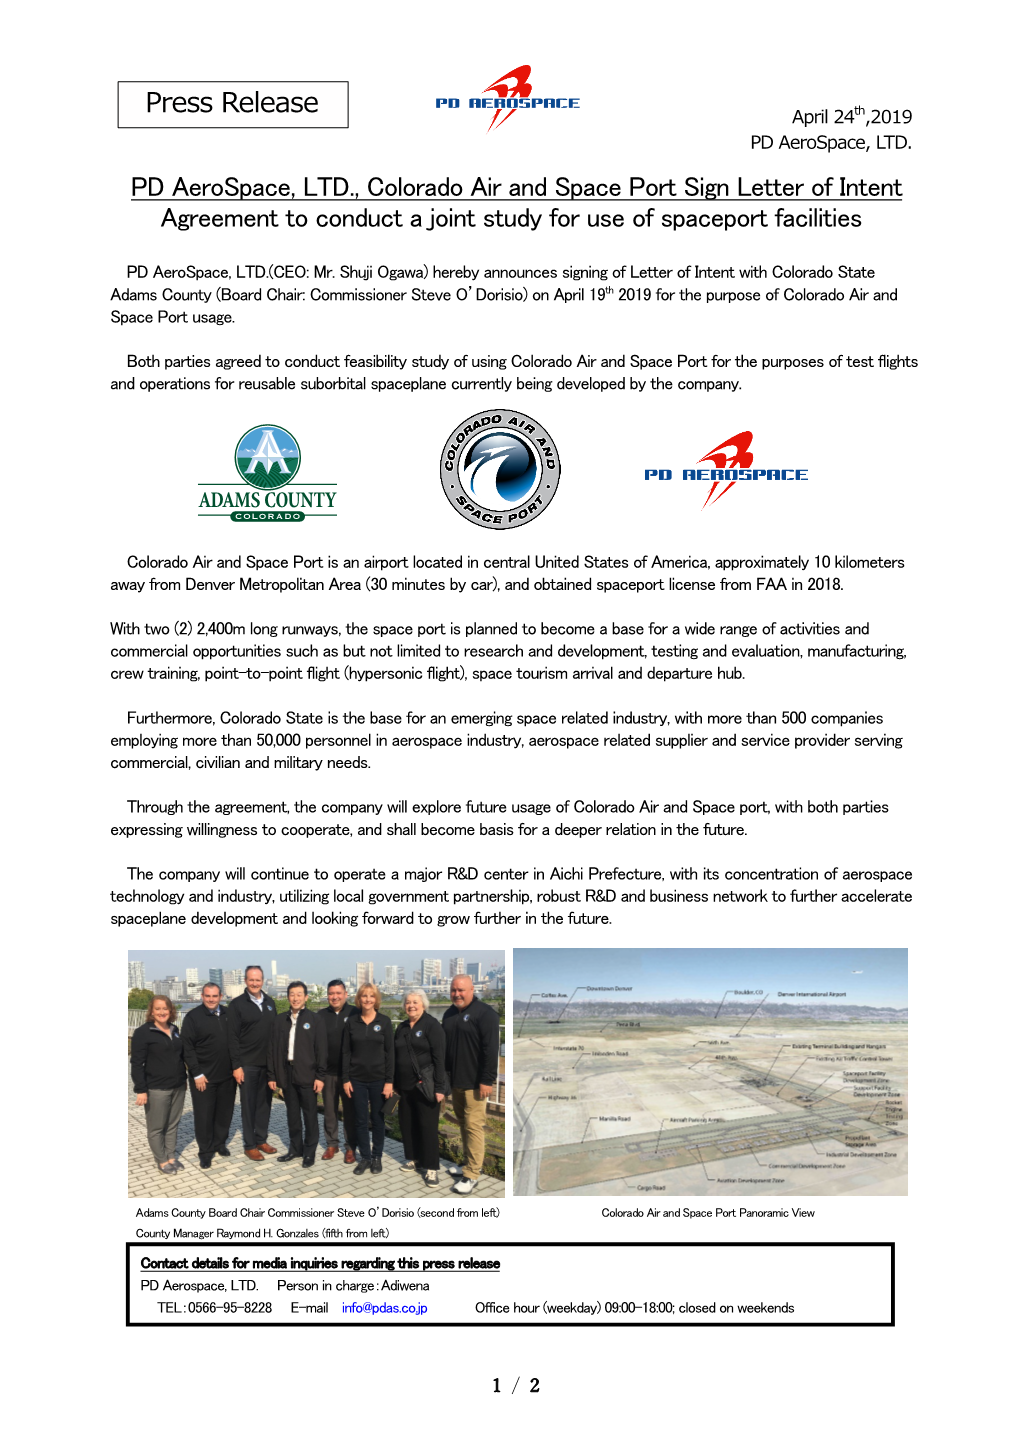 PD Aerospace, LTD., Colorado Air and Space Port Sign Letter of Intent Agreement to Conduct a Joint Study for Use of Spaceport Facilities